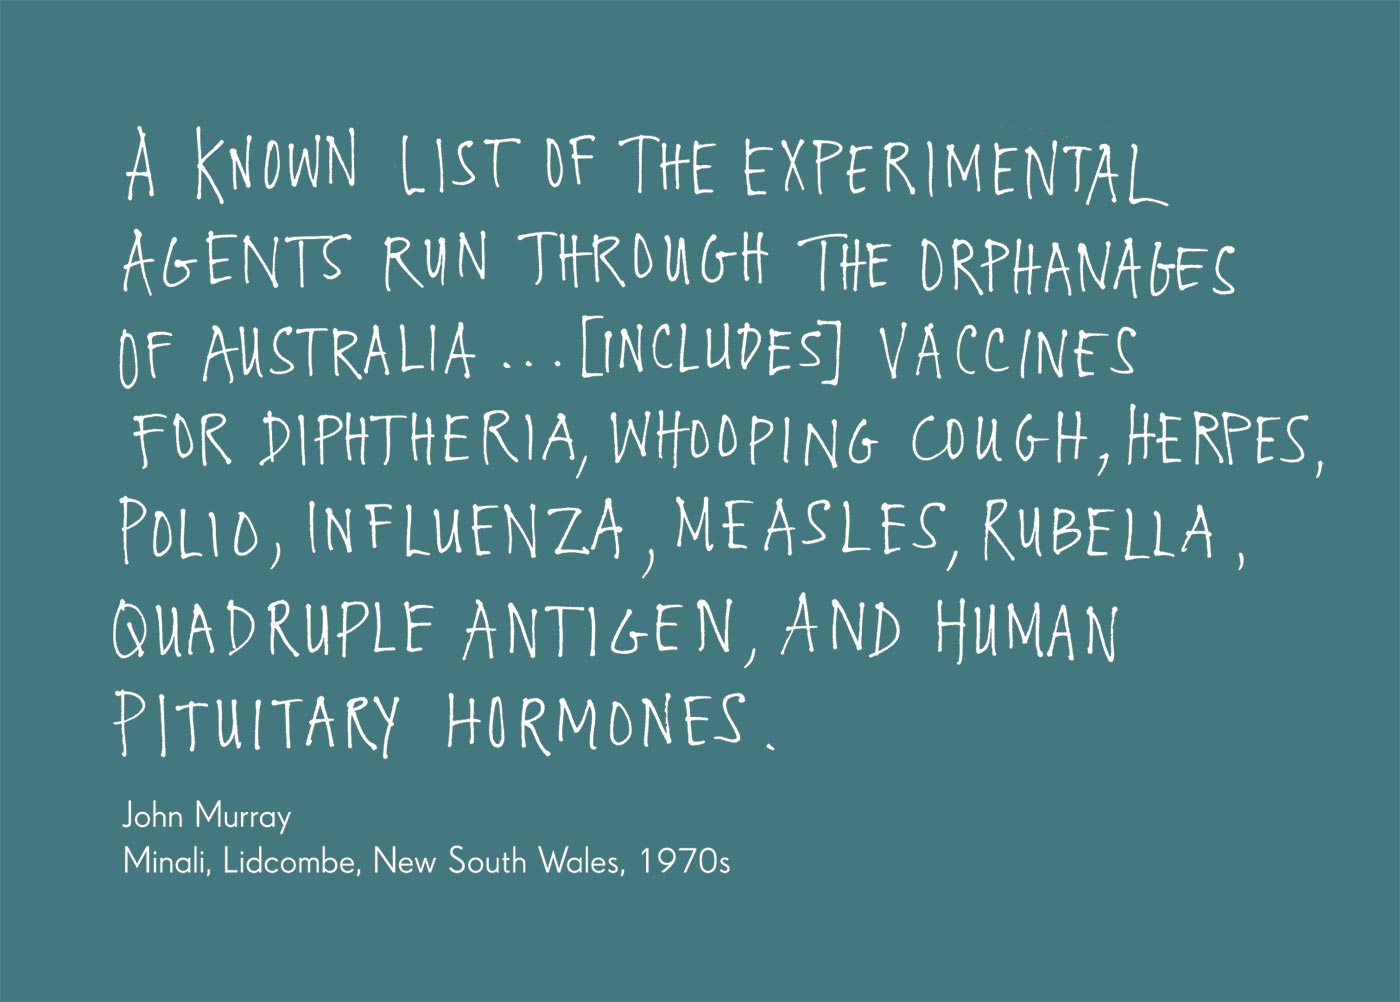 Exhibition graphic panel that reads: 'A known list of the experimental agents run through the orphanages of Australia ...[includes] vaccines for diphtheria, whooping cough, herpes, polio, influenza, measles, rubella, quadruple antigen, and human pituitary hormones', attributed to 'John Murray, Minali, Lidcombe, New South Wales, 1970s'. - click to view larger image